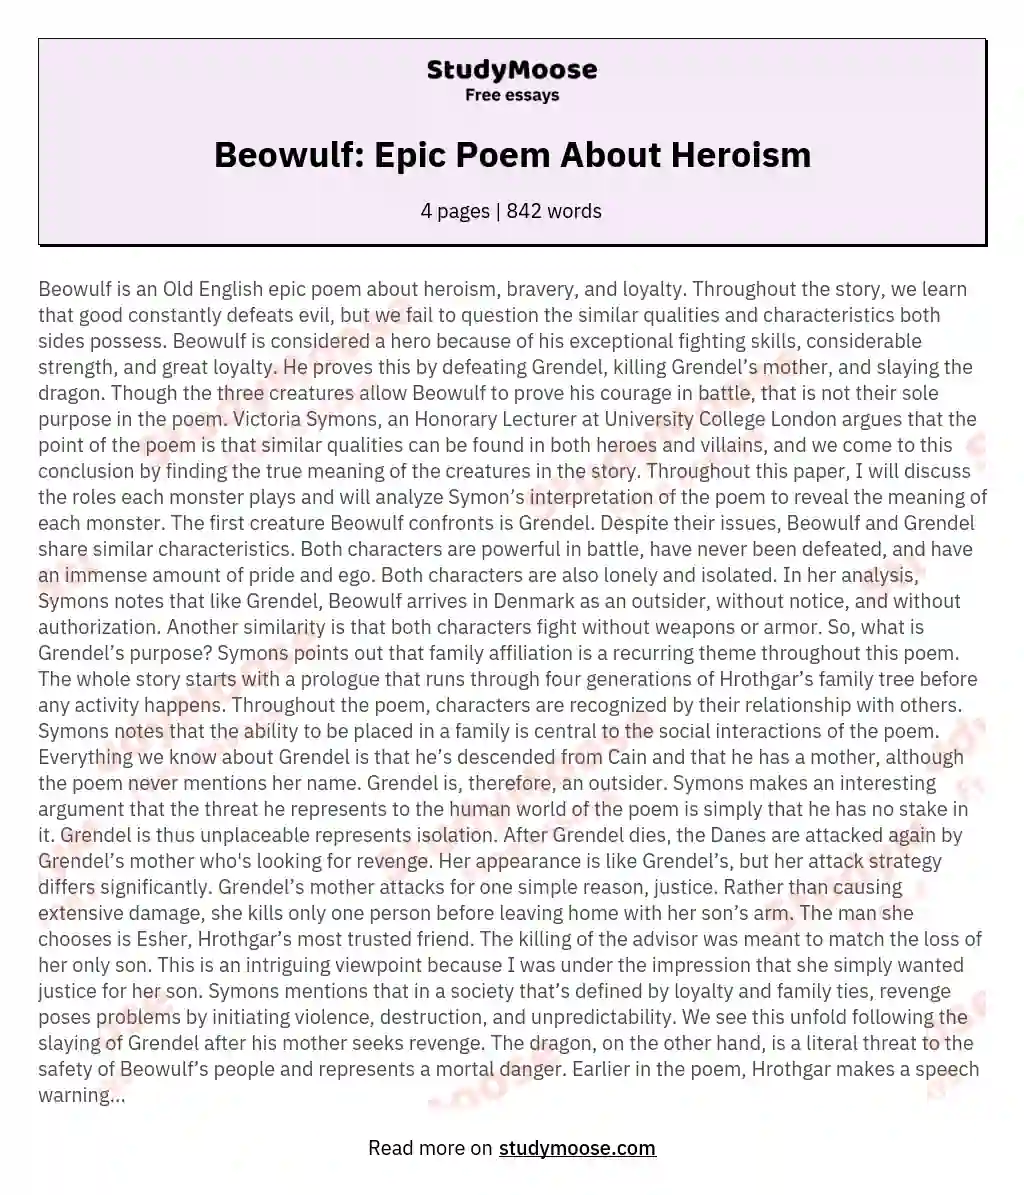 Beowulf: Epic Poem About Heroism